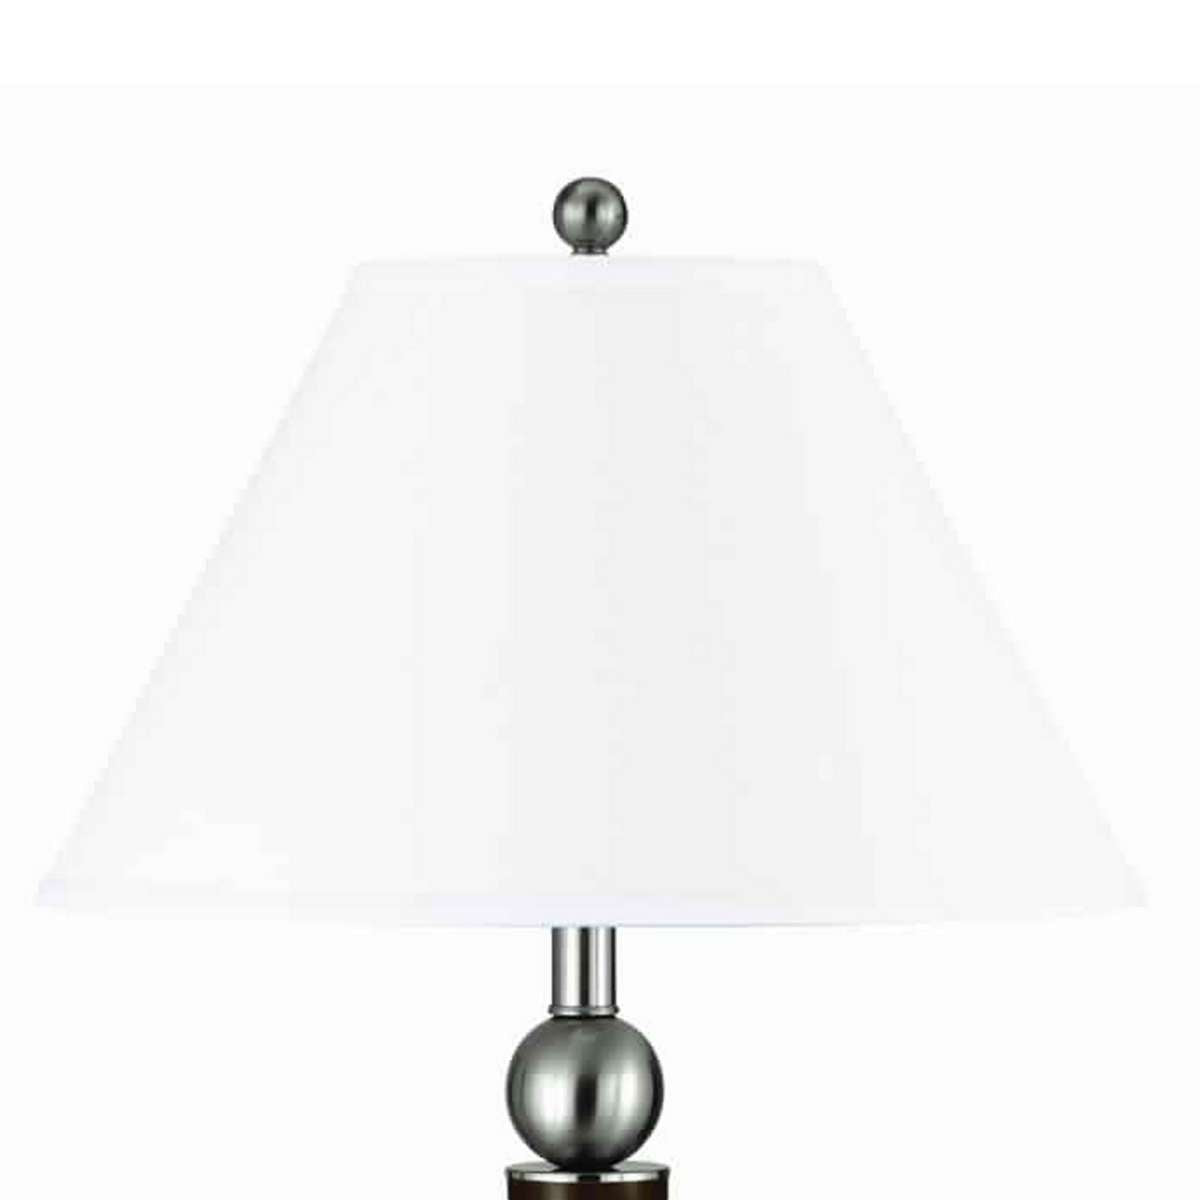 Fabric Shade Table Lamp With Metal Base And Ball Accent, White And Brown By Benzara